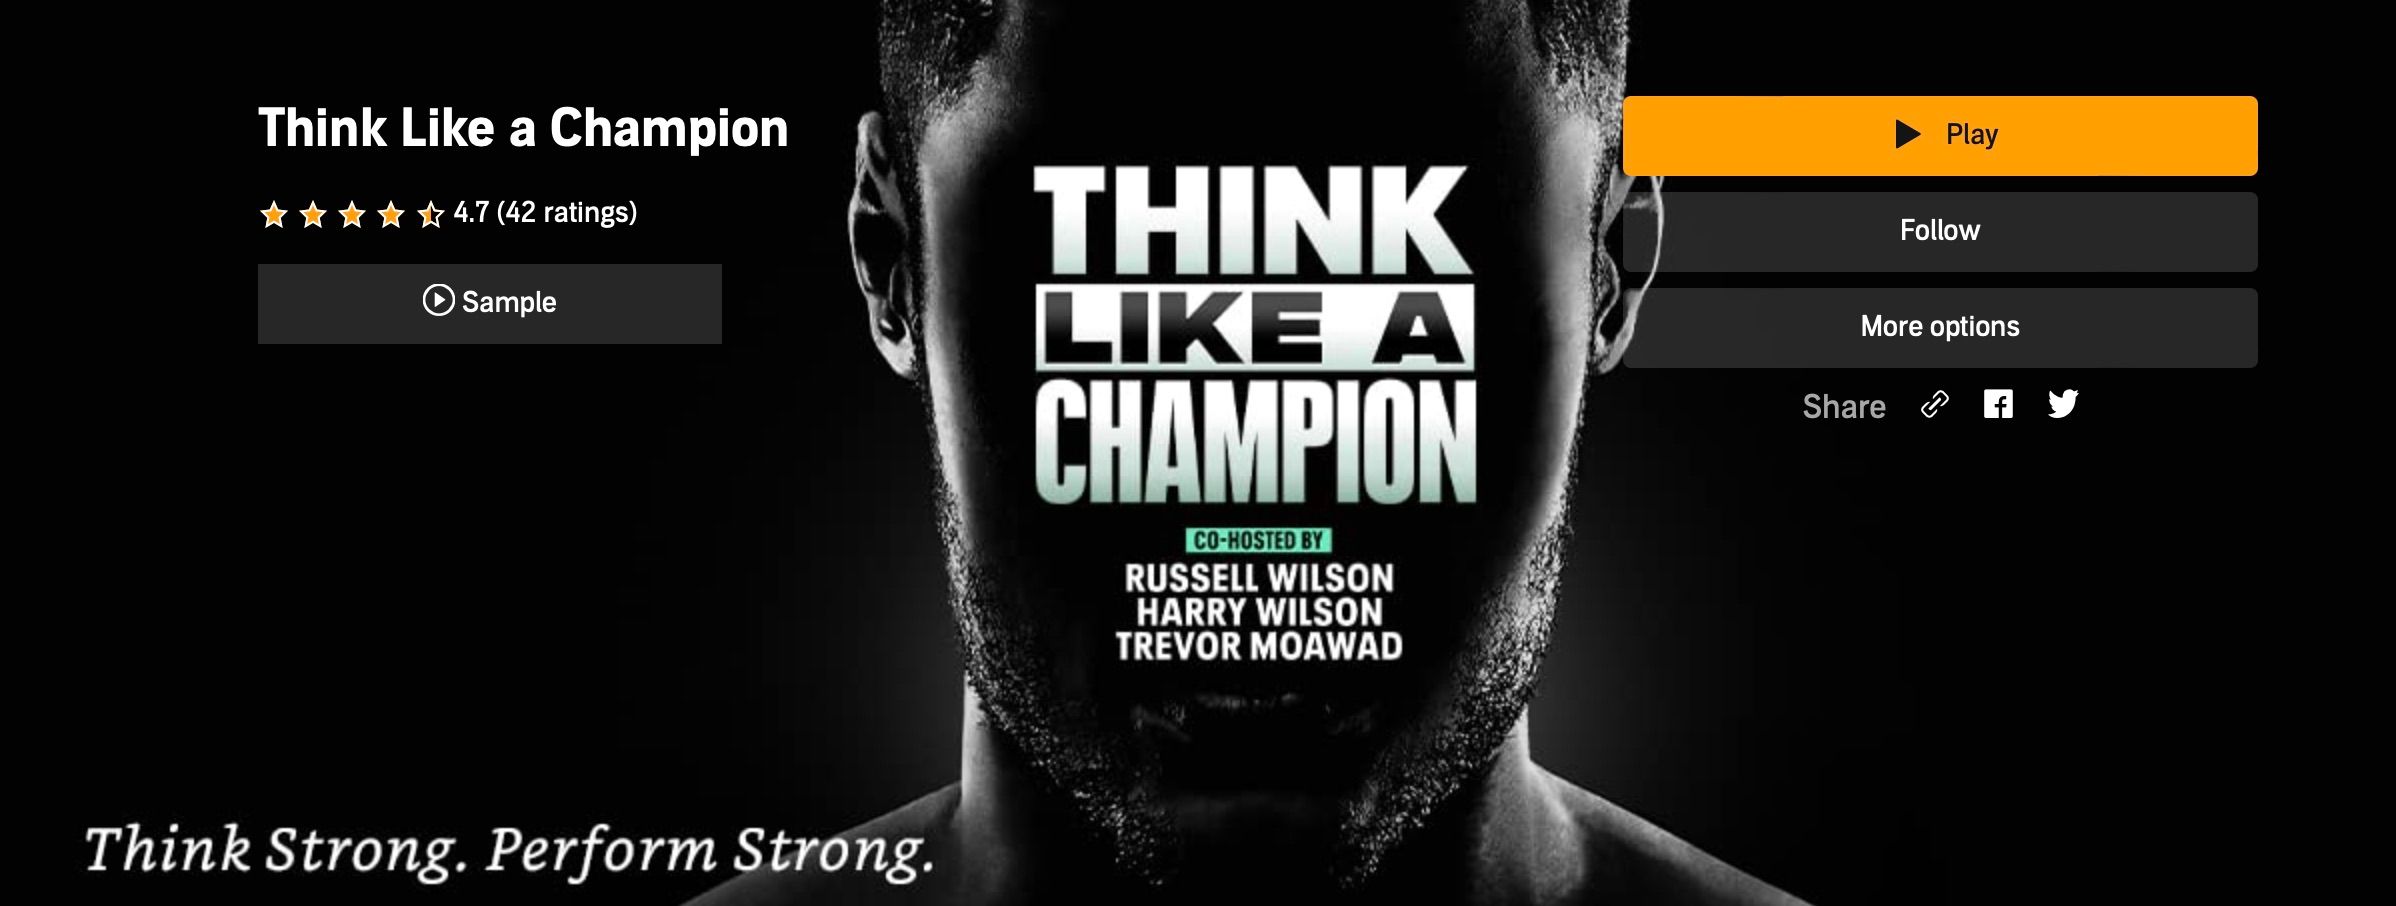 Screenshot showing Audible's Think Like a Champion podcast